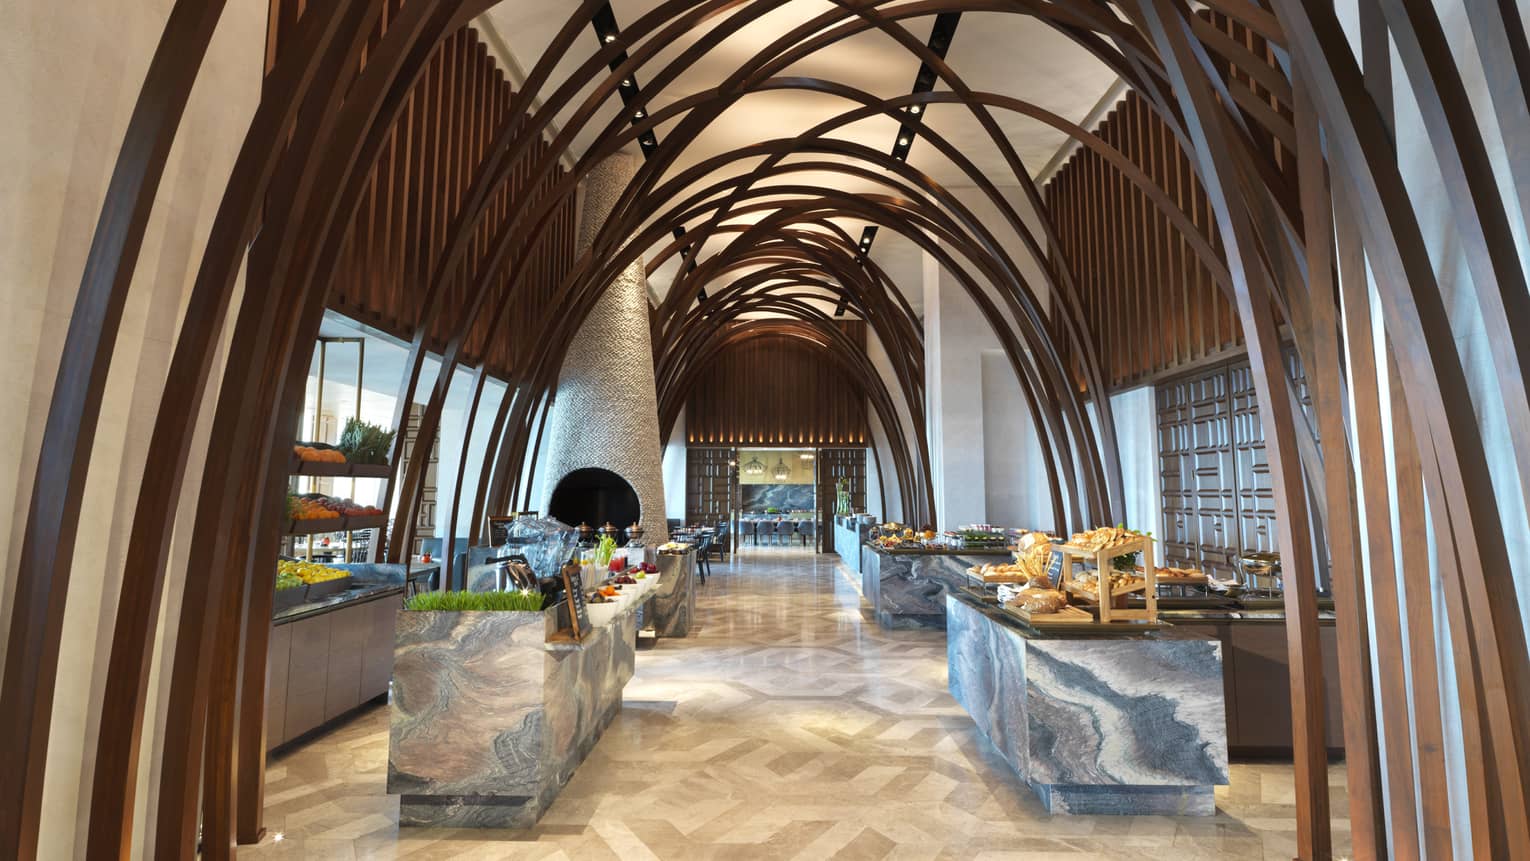 Soaring ceilings, wood arches over marble buffets in modern Arabian Design hallway